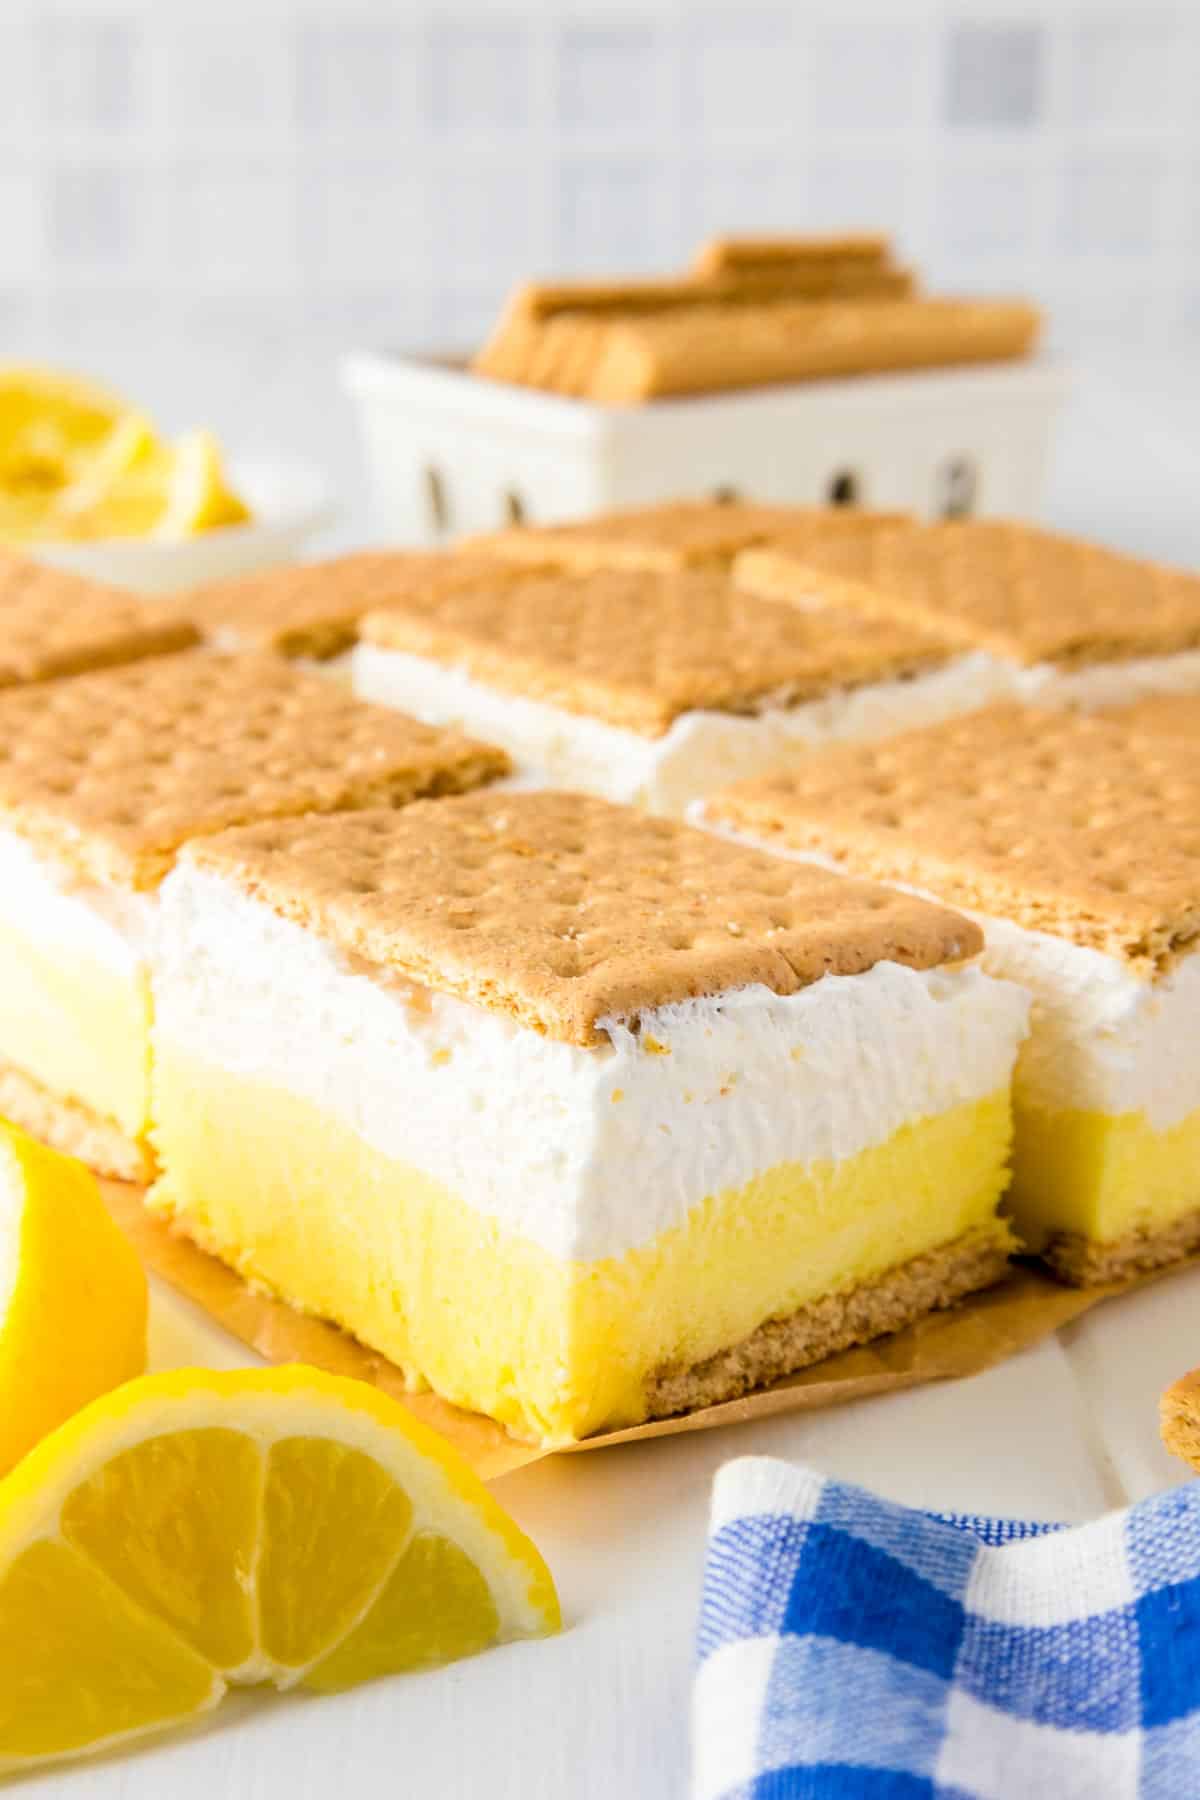 Slices of lemon smores topped with graham crackers laying on a piece of parchment paper so you can see the lemon and marshmallow cream layer.